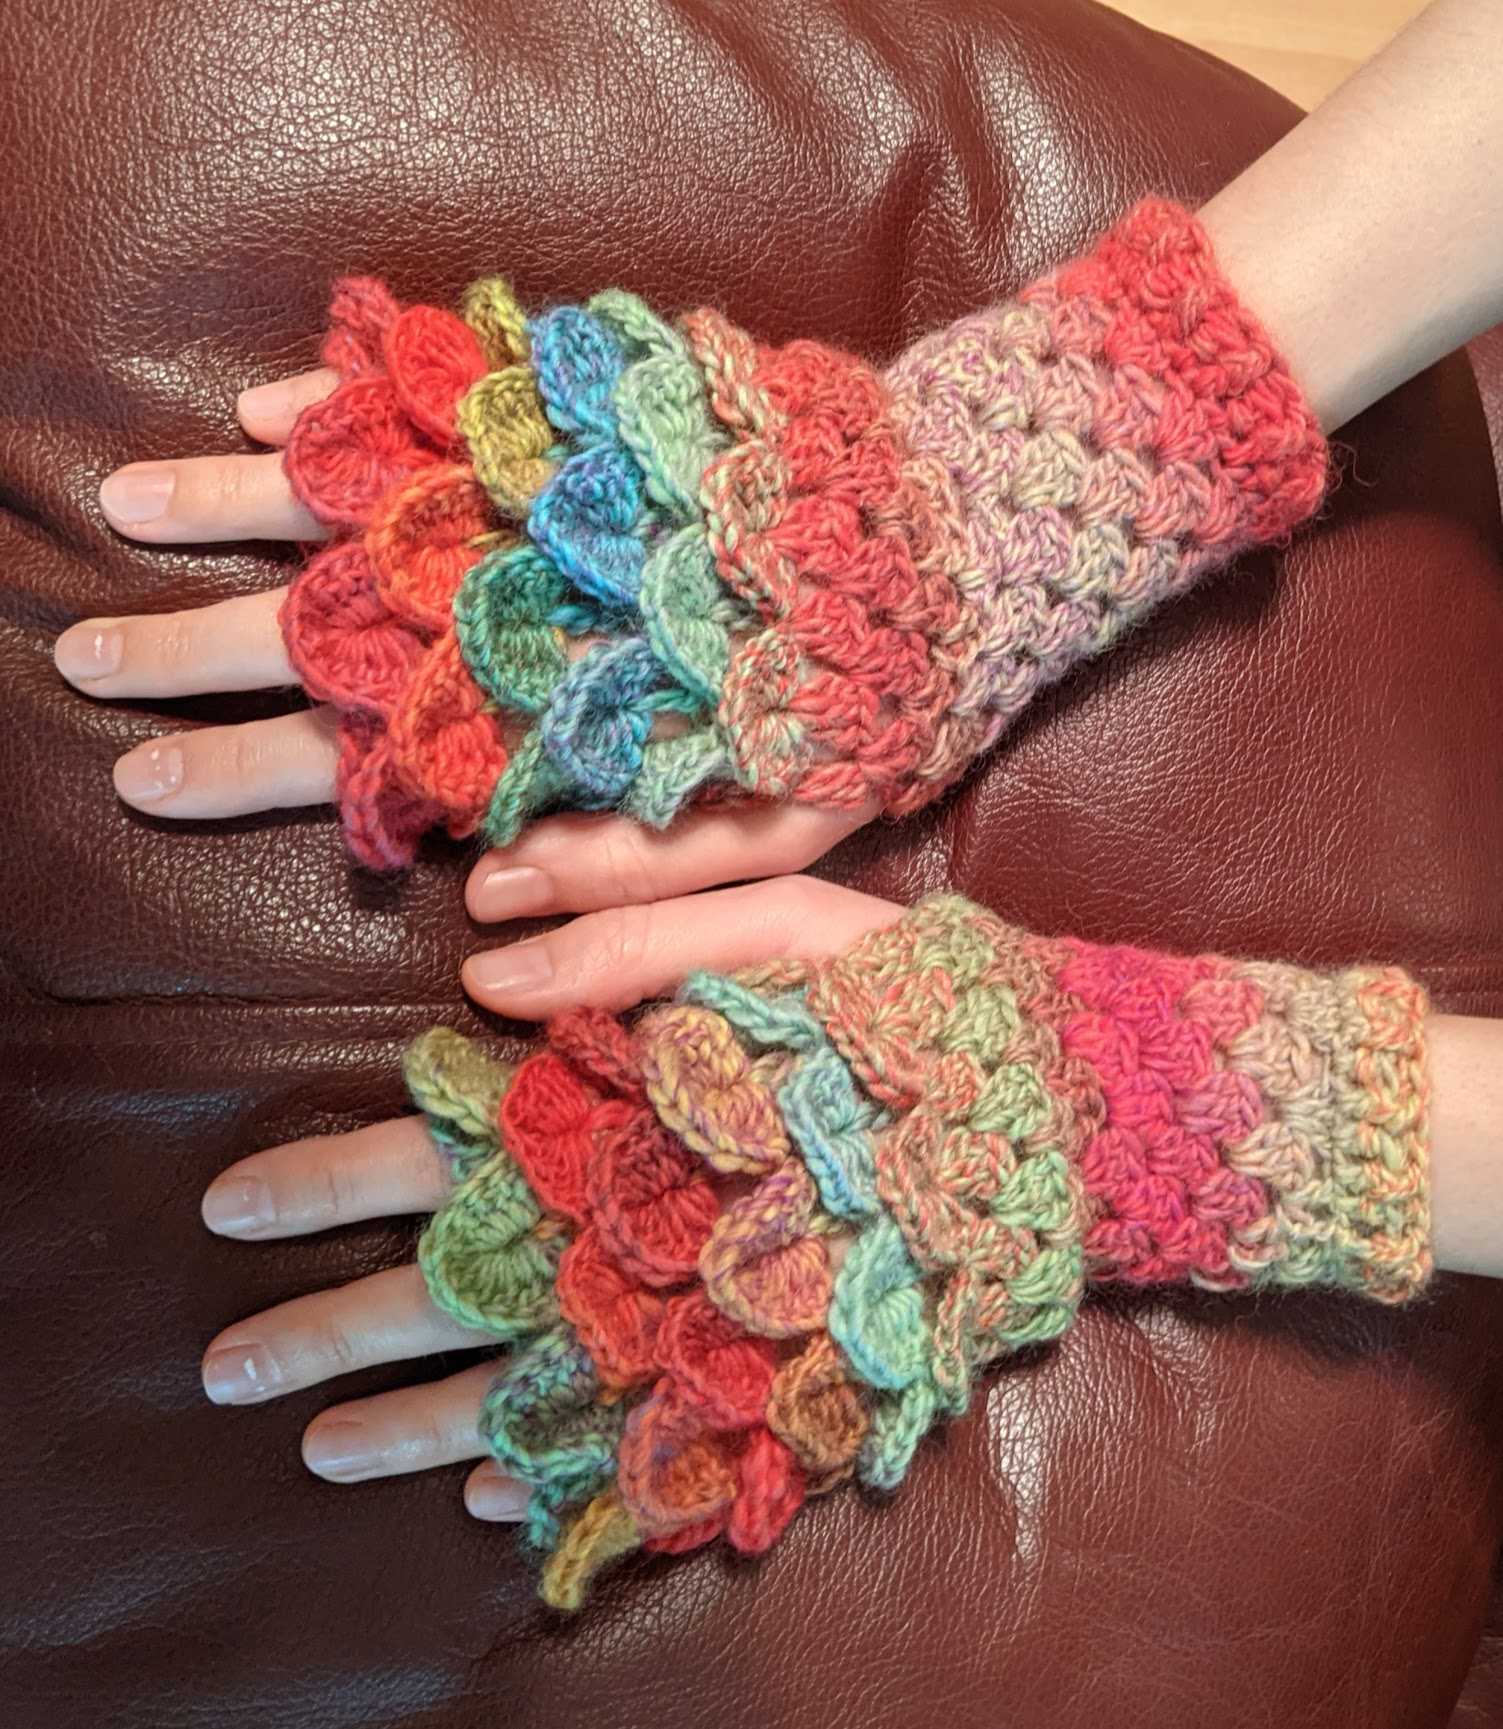 This was such a fun pattern, and the gloves are really warm. I want to make these for everyone!